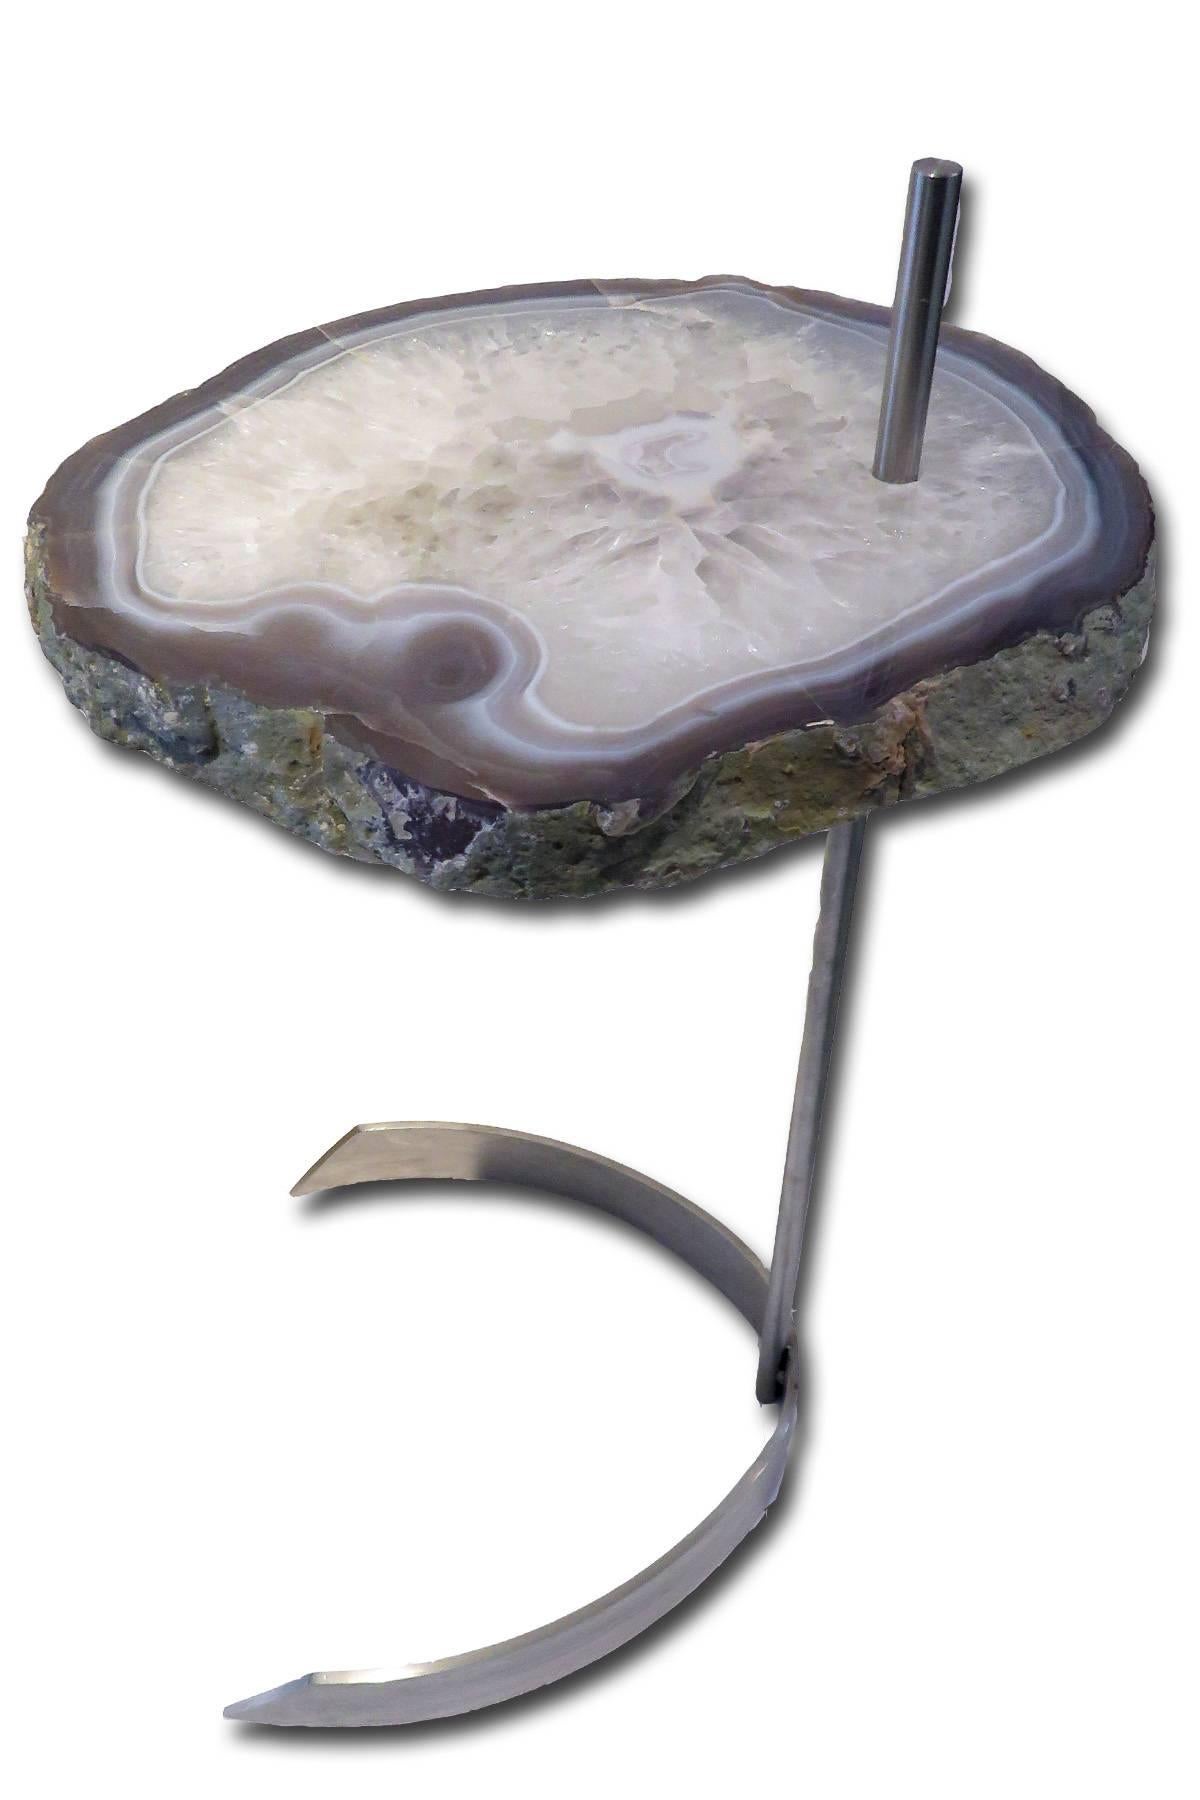 This agate slab forming a side table or cocktail table, is from Brazil and has a combination of colors surrounding the white center with hints of blue, grey and brown. 
Agates are formed in rounded nodules, which are sliced open to bring out the